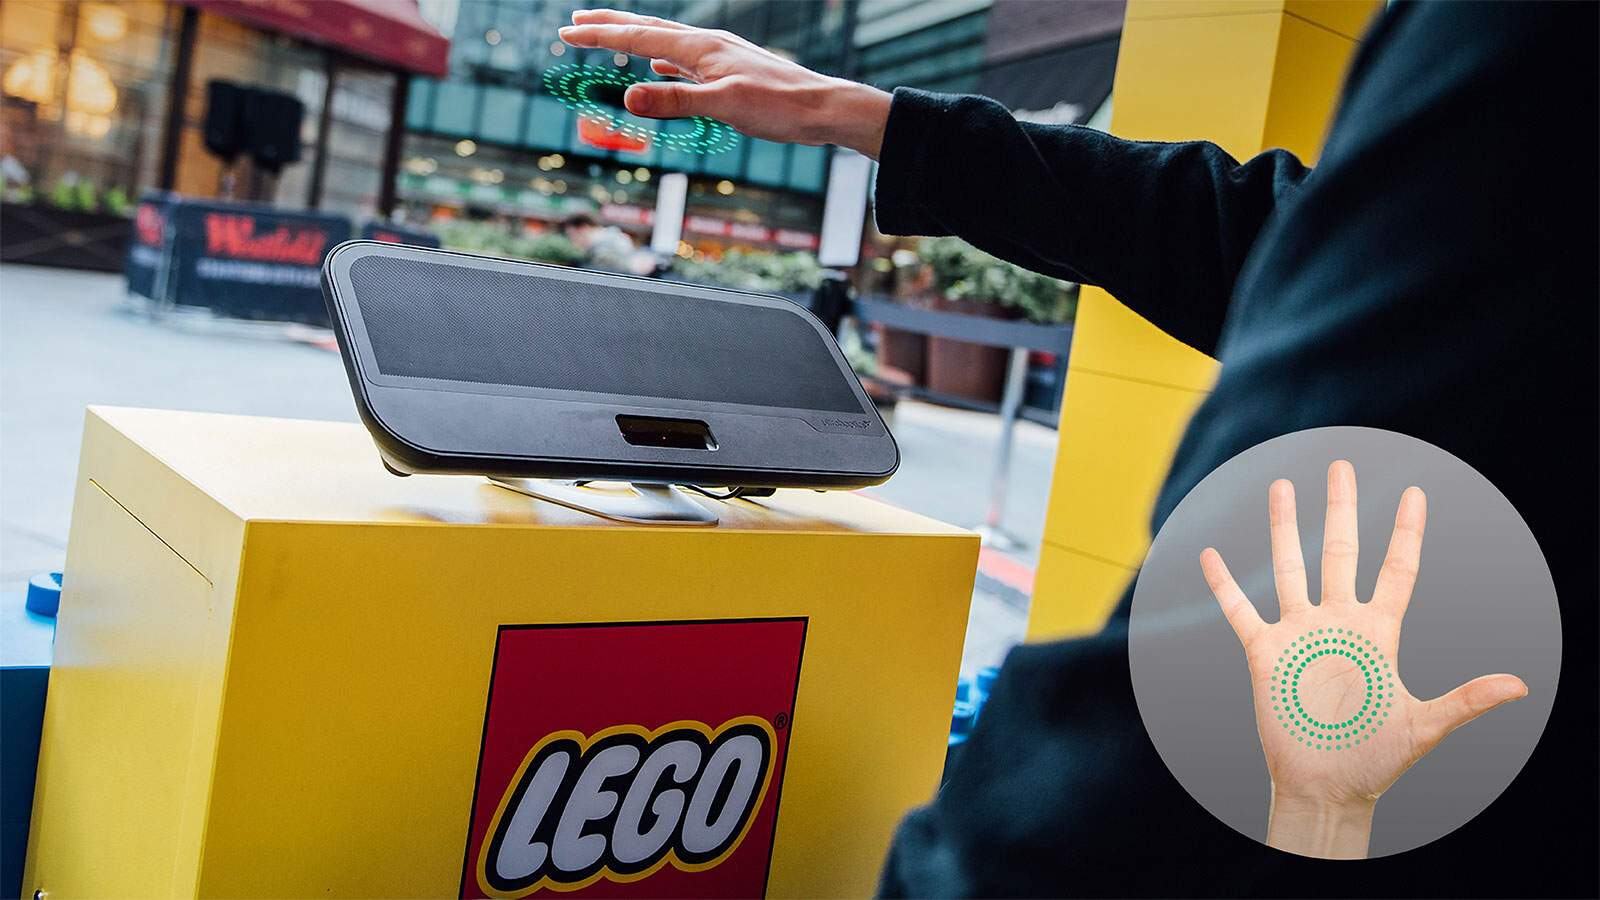 LEGO using Ultraleap haptics technology for an interactive experience on a persons hand